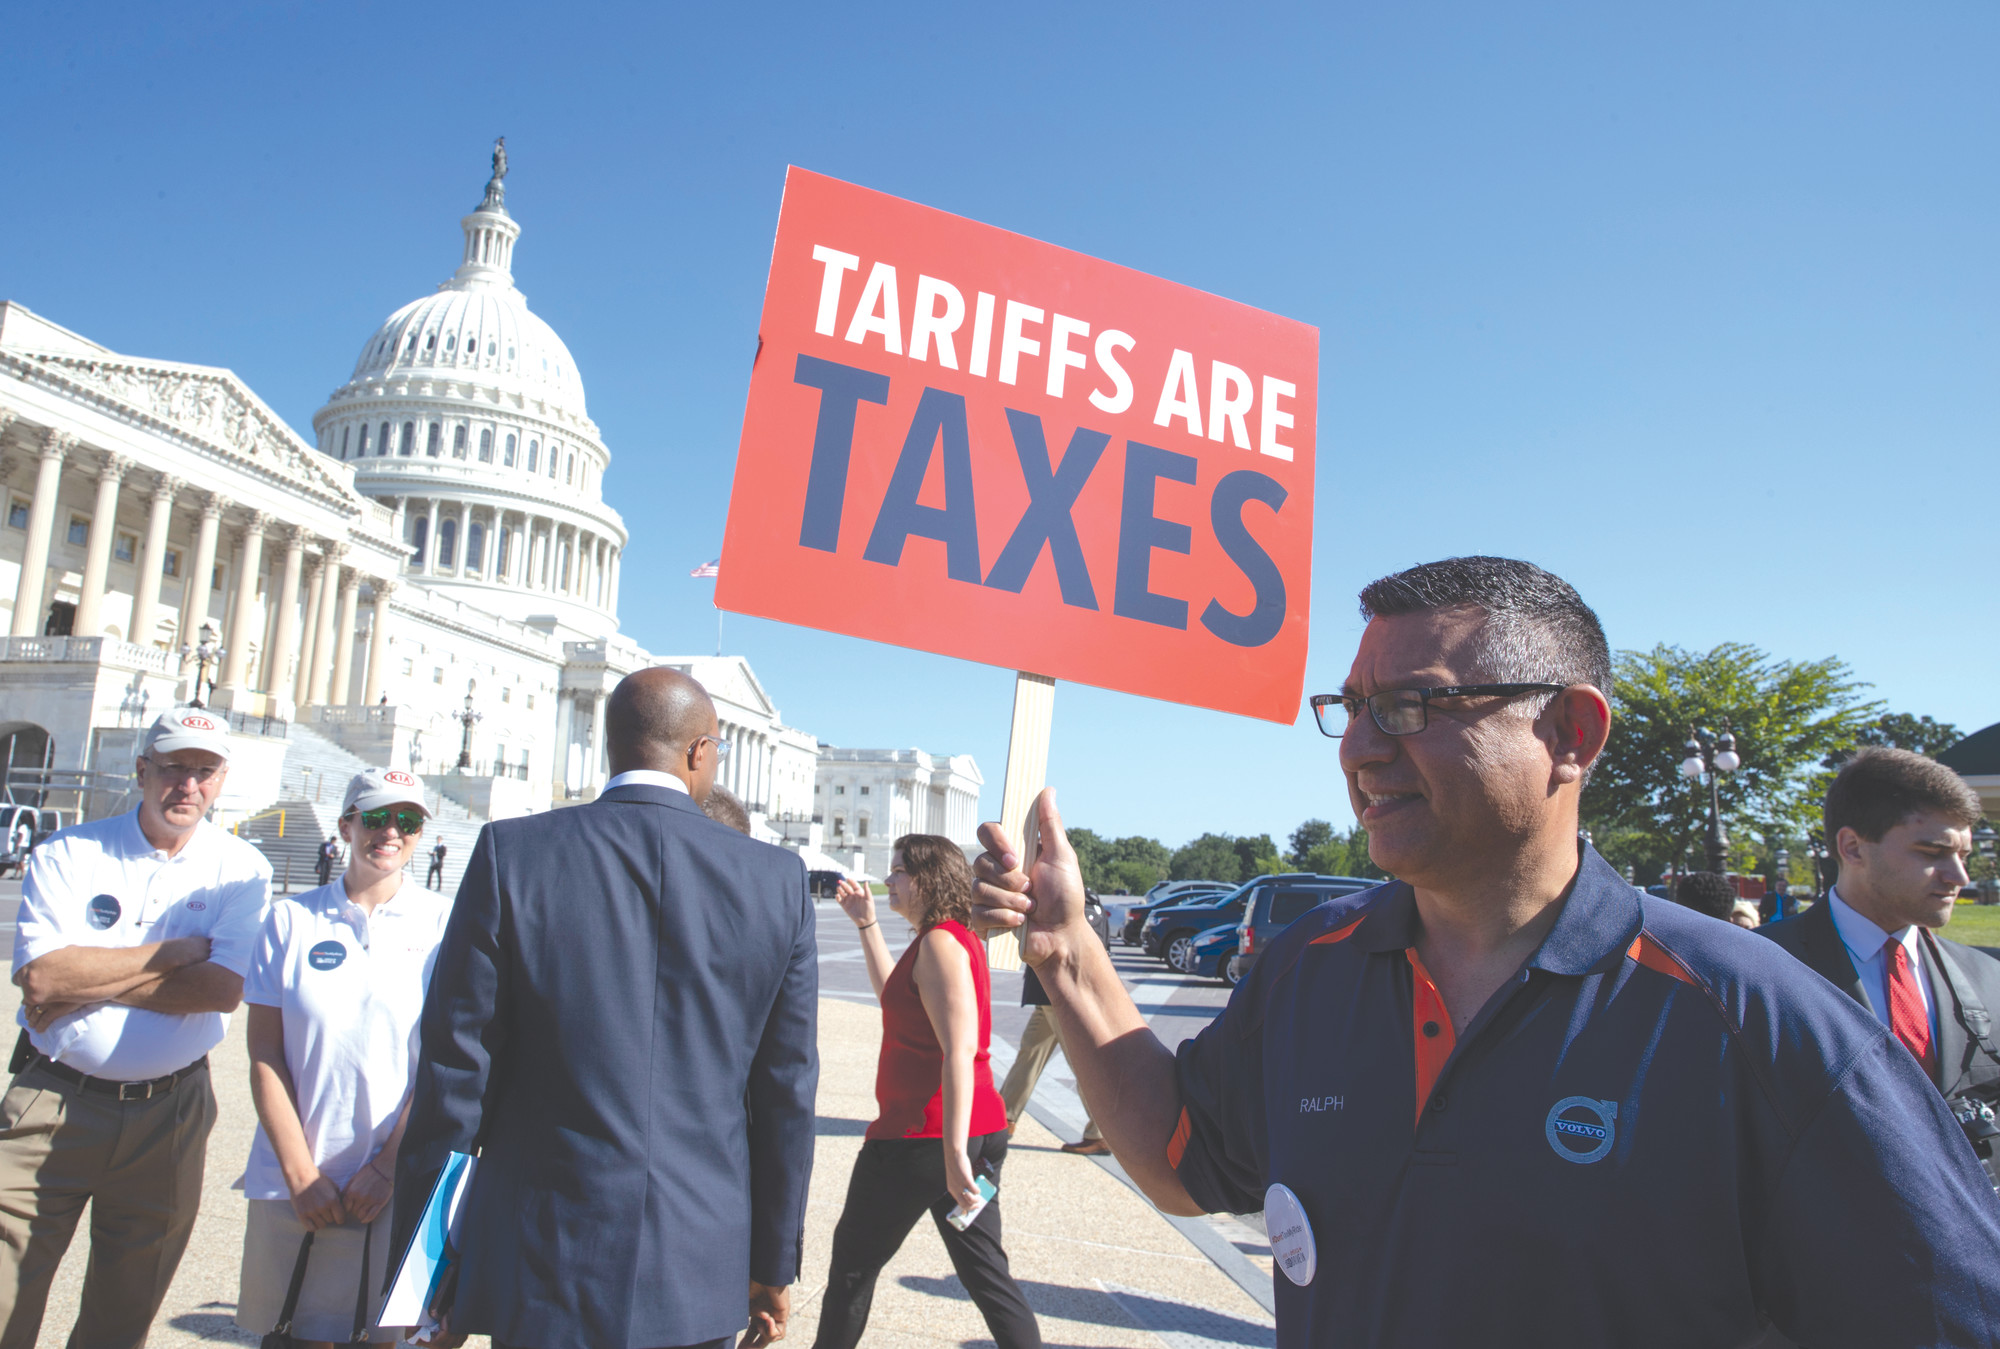 Ralph Garcia, who works for Volvo in South Carolina, joins other Americans who work for international auto companies demonstrating on Capitol Hill in Washington on July 19 against trade tariffs they say will negatively affect U.S. auto manufacturing.